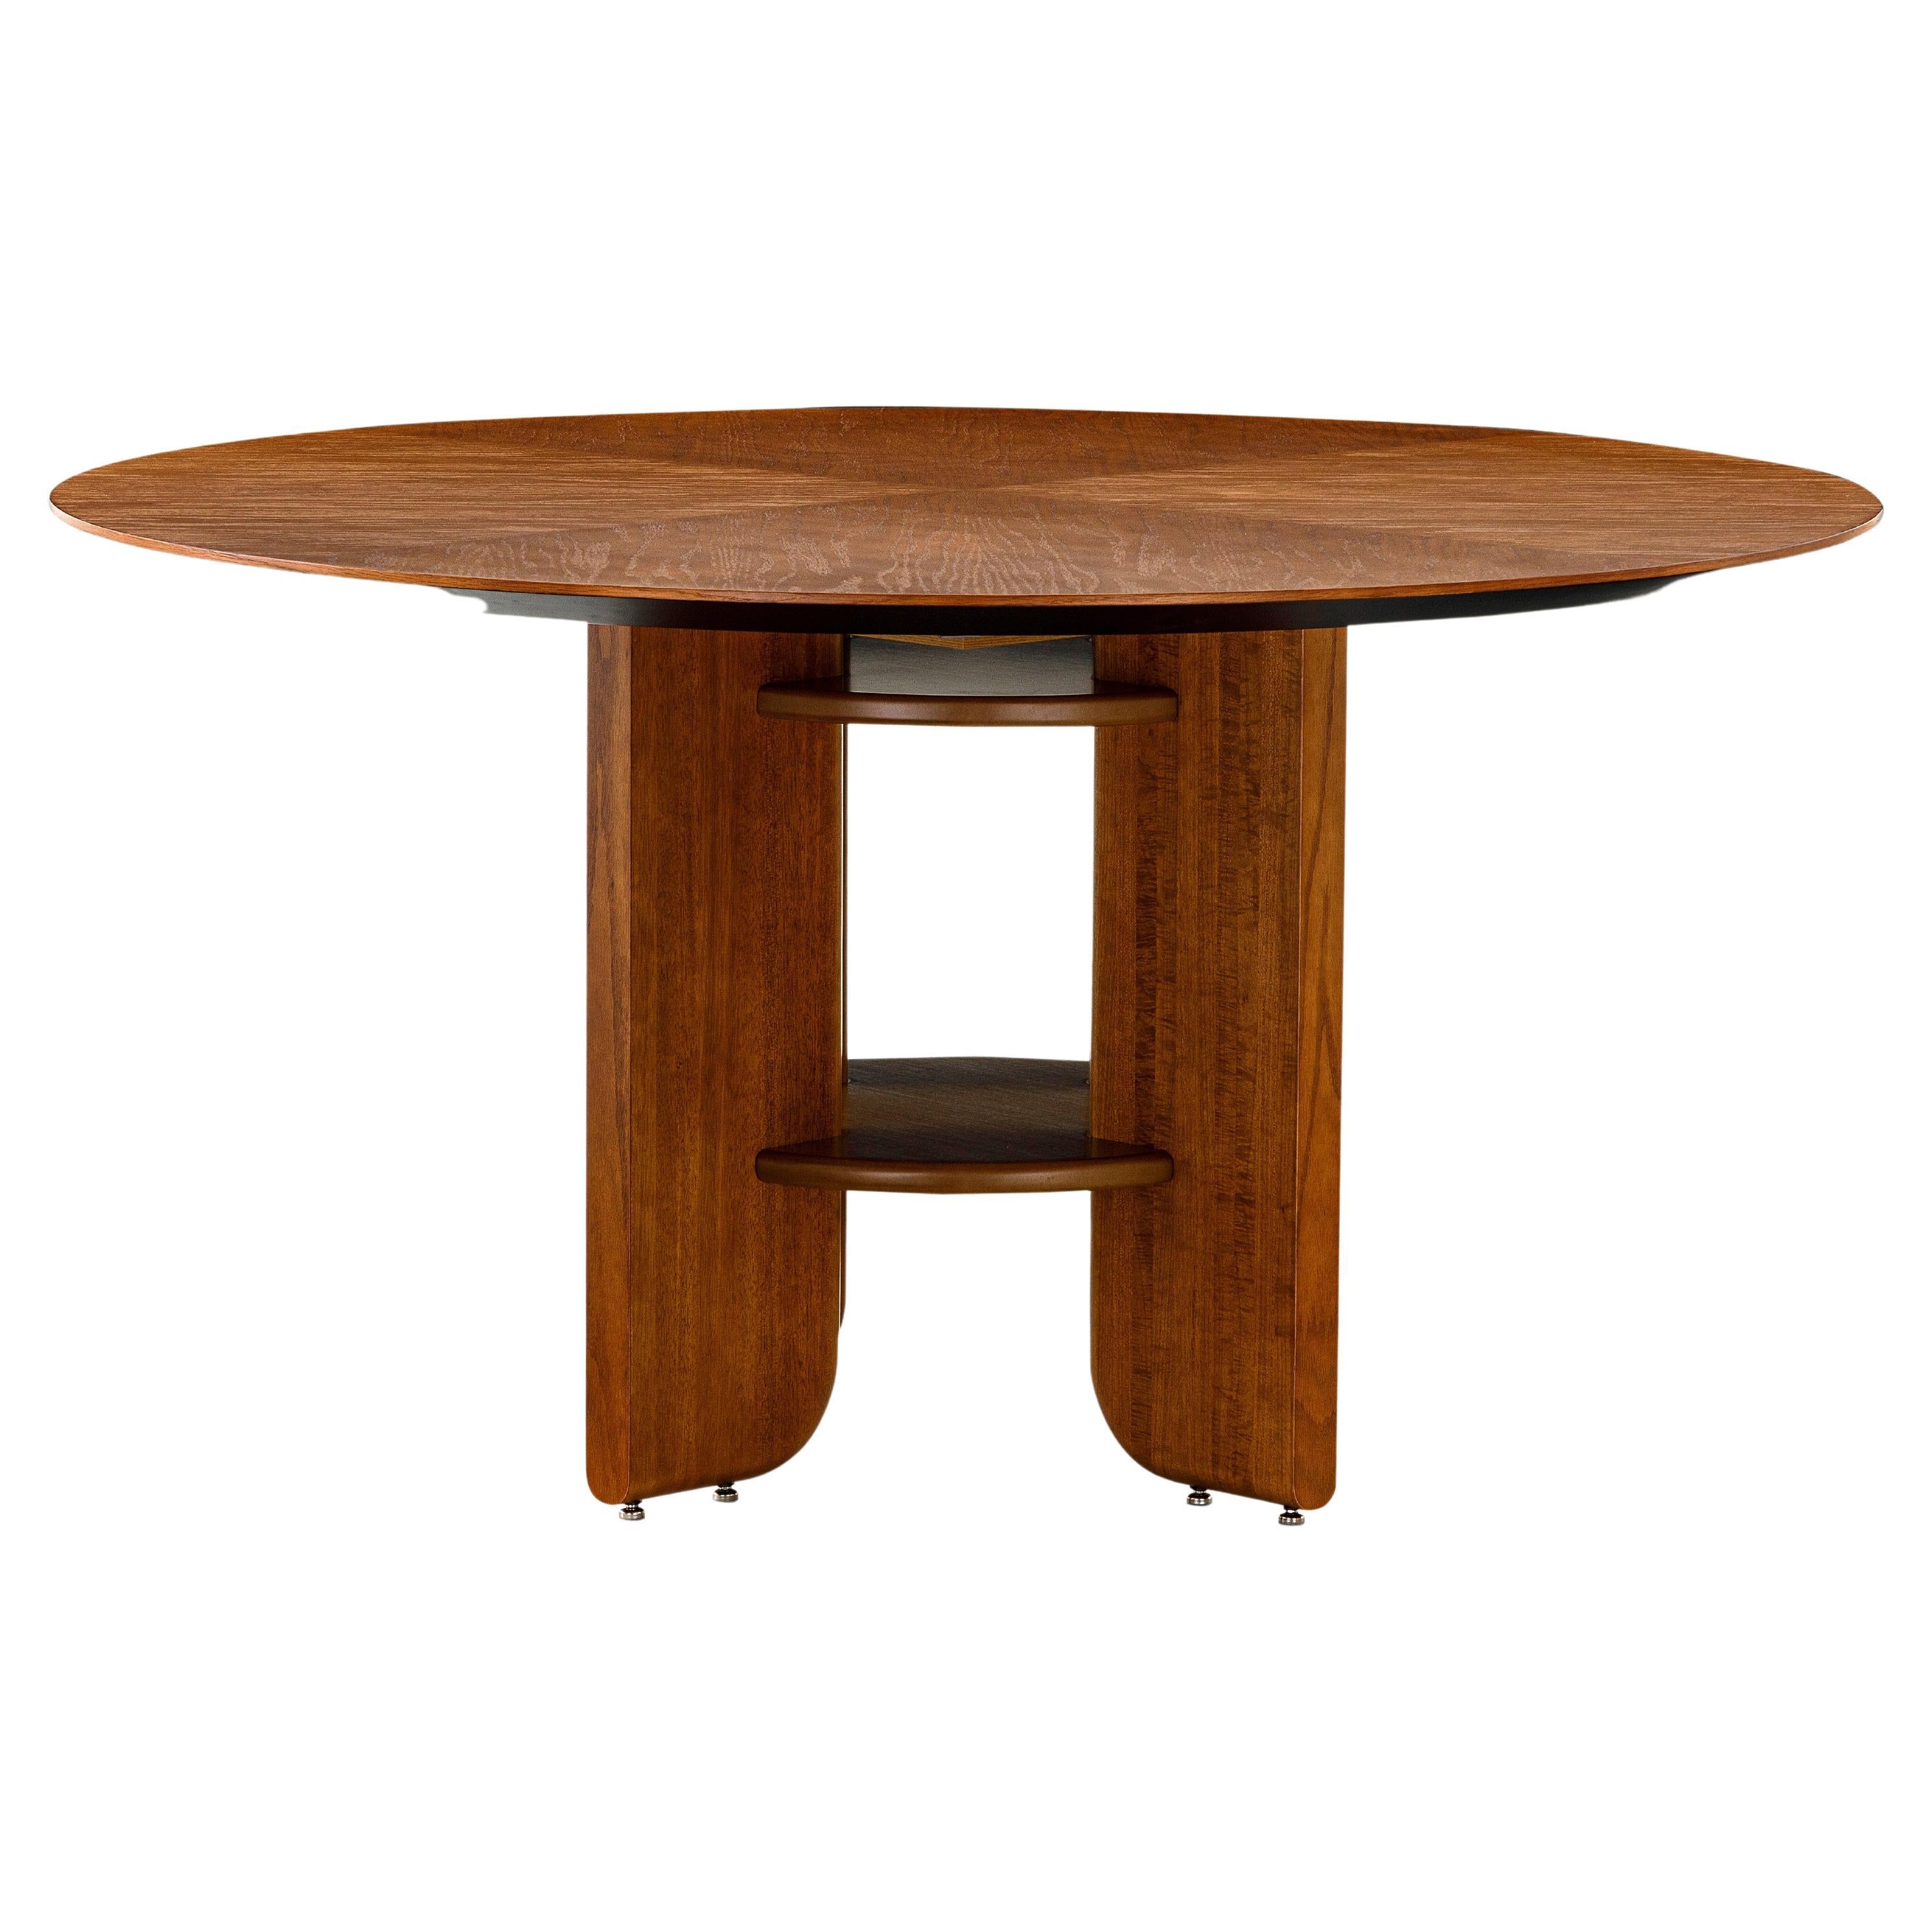 Moon Round Dining Table with Almond Oak Veneered Top and Wood Legs 55''